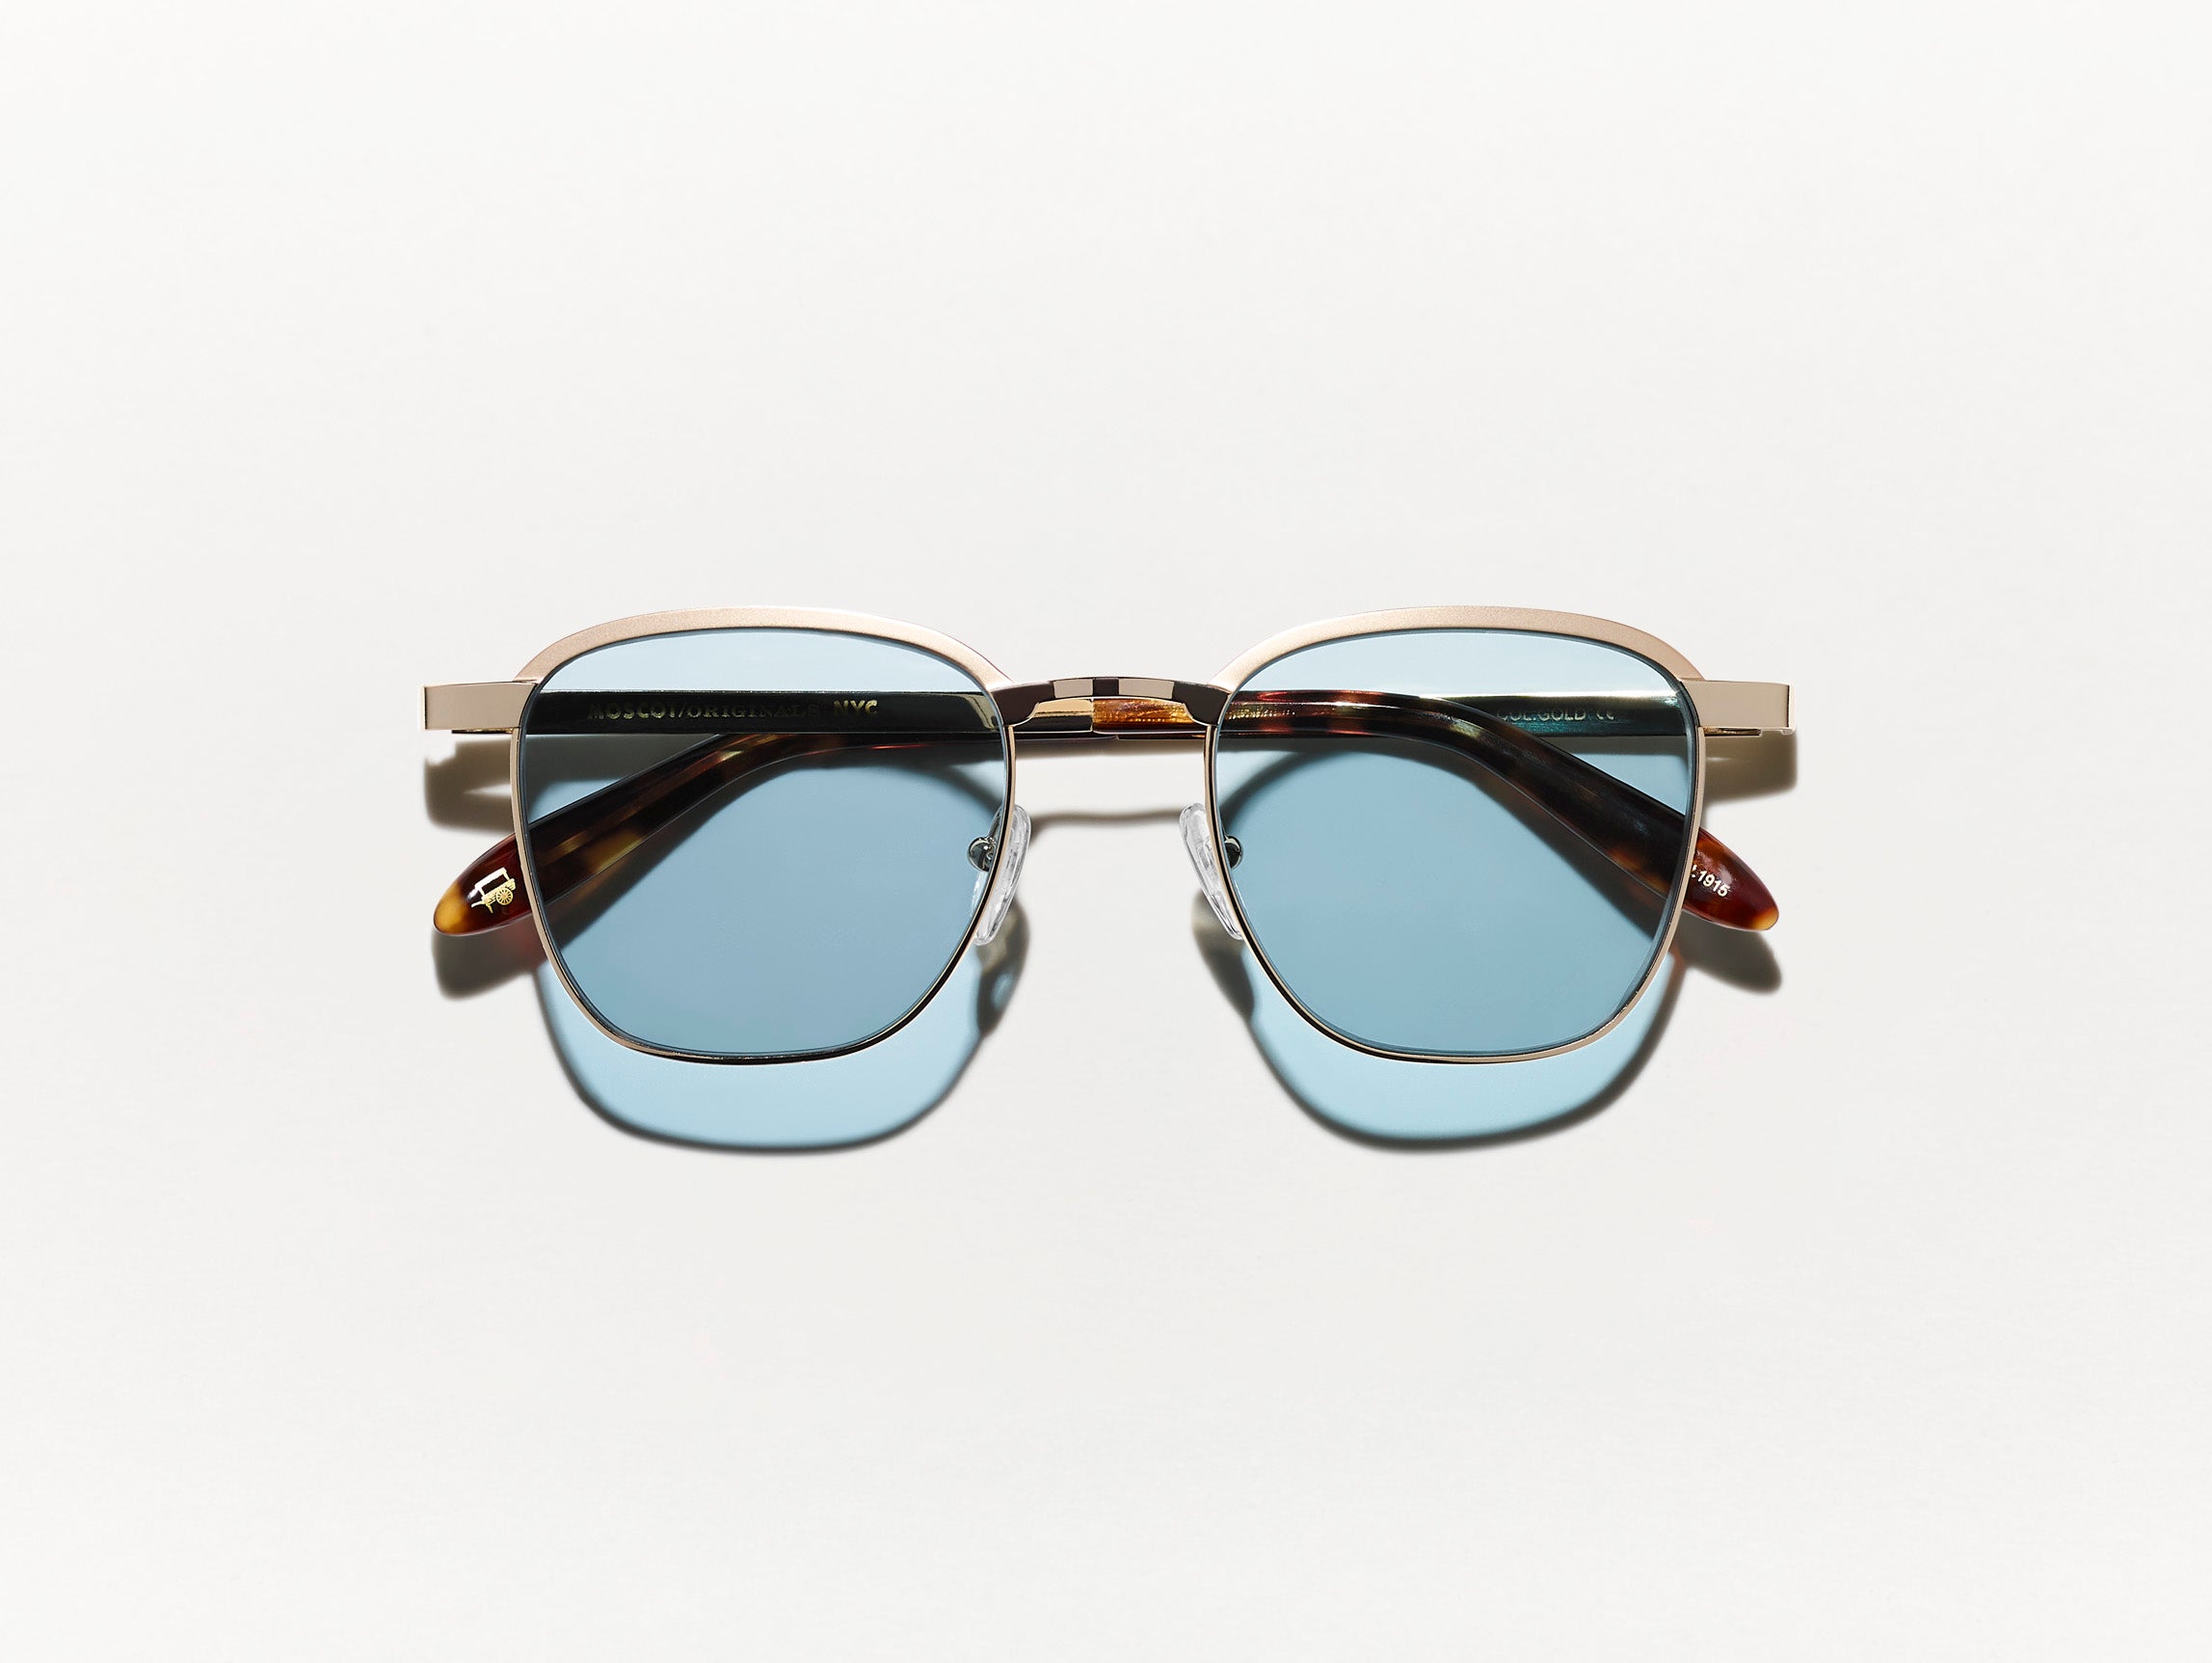 The MISH SUN in Gold with DG-37 Blue Glass Lenses